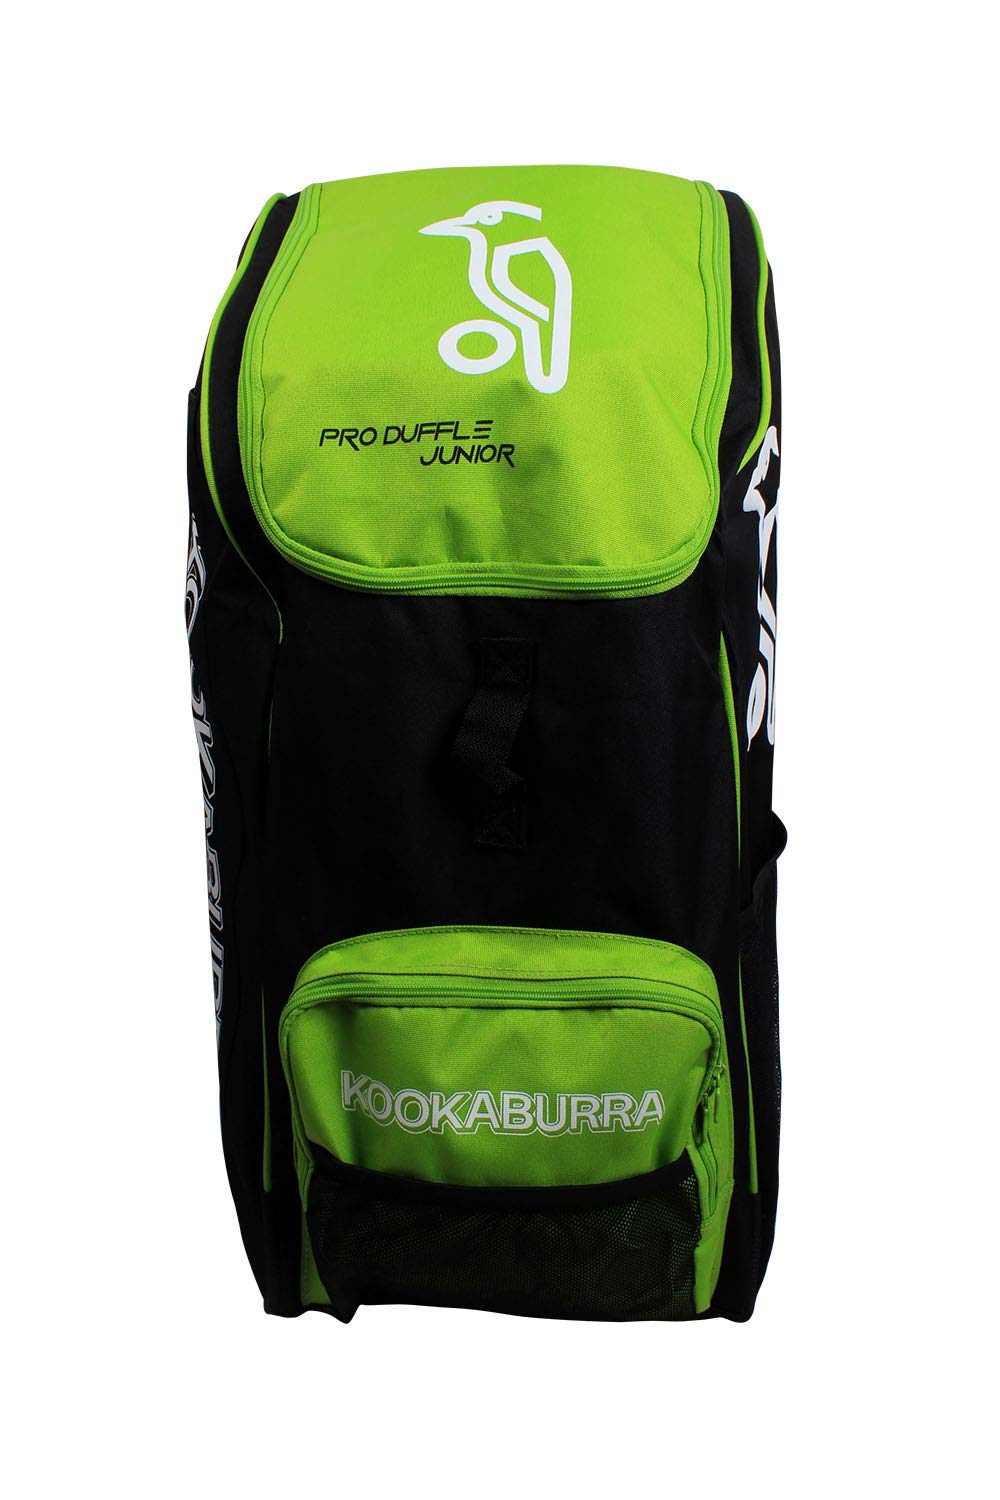 CRICKET KIT BAG MRF in Meerut at best price by LOOMEX SPORTS PRIVATE  LIMITED - Justdial